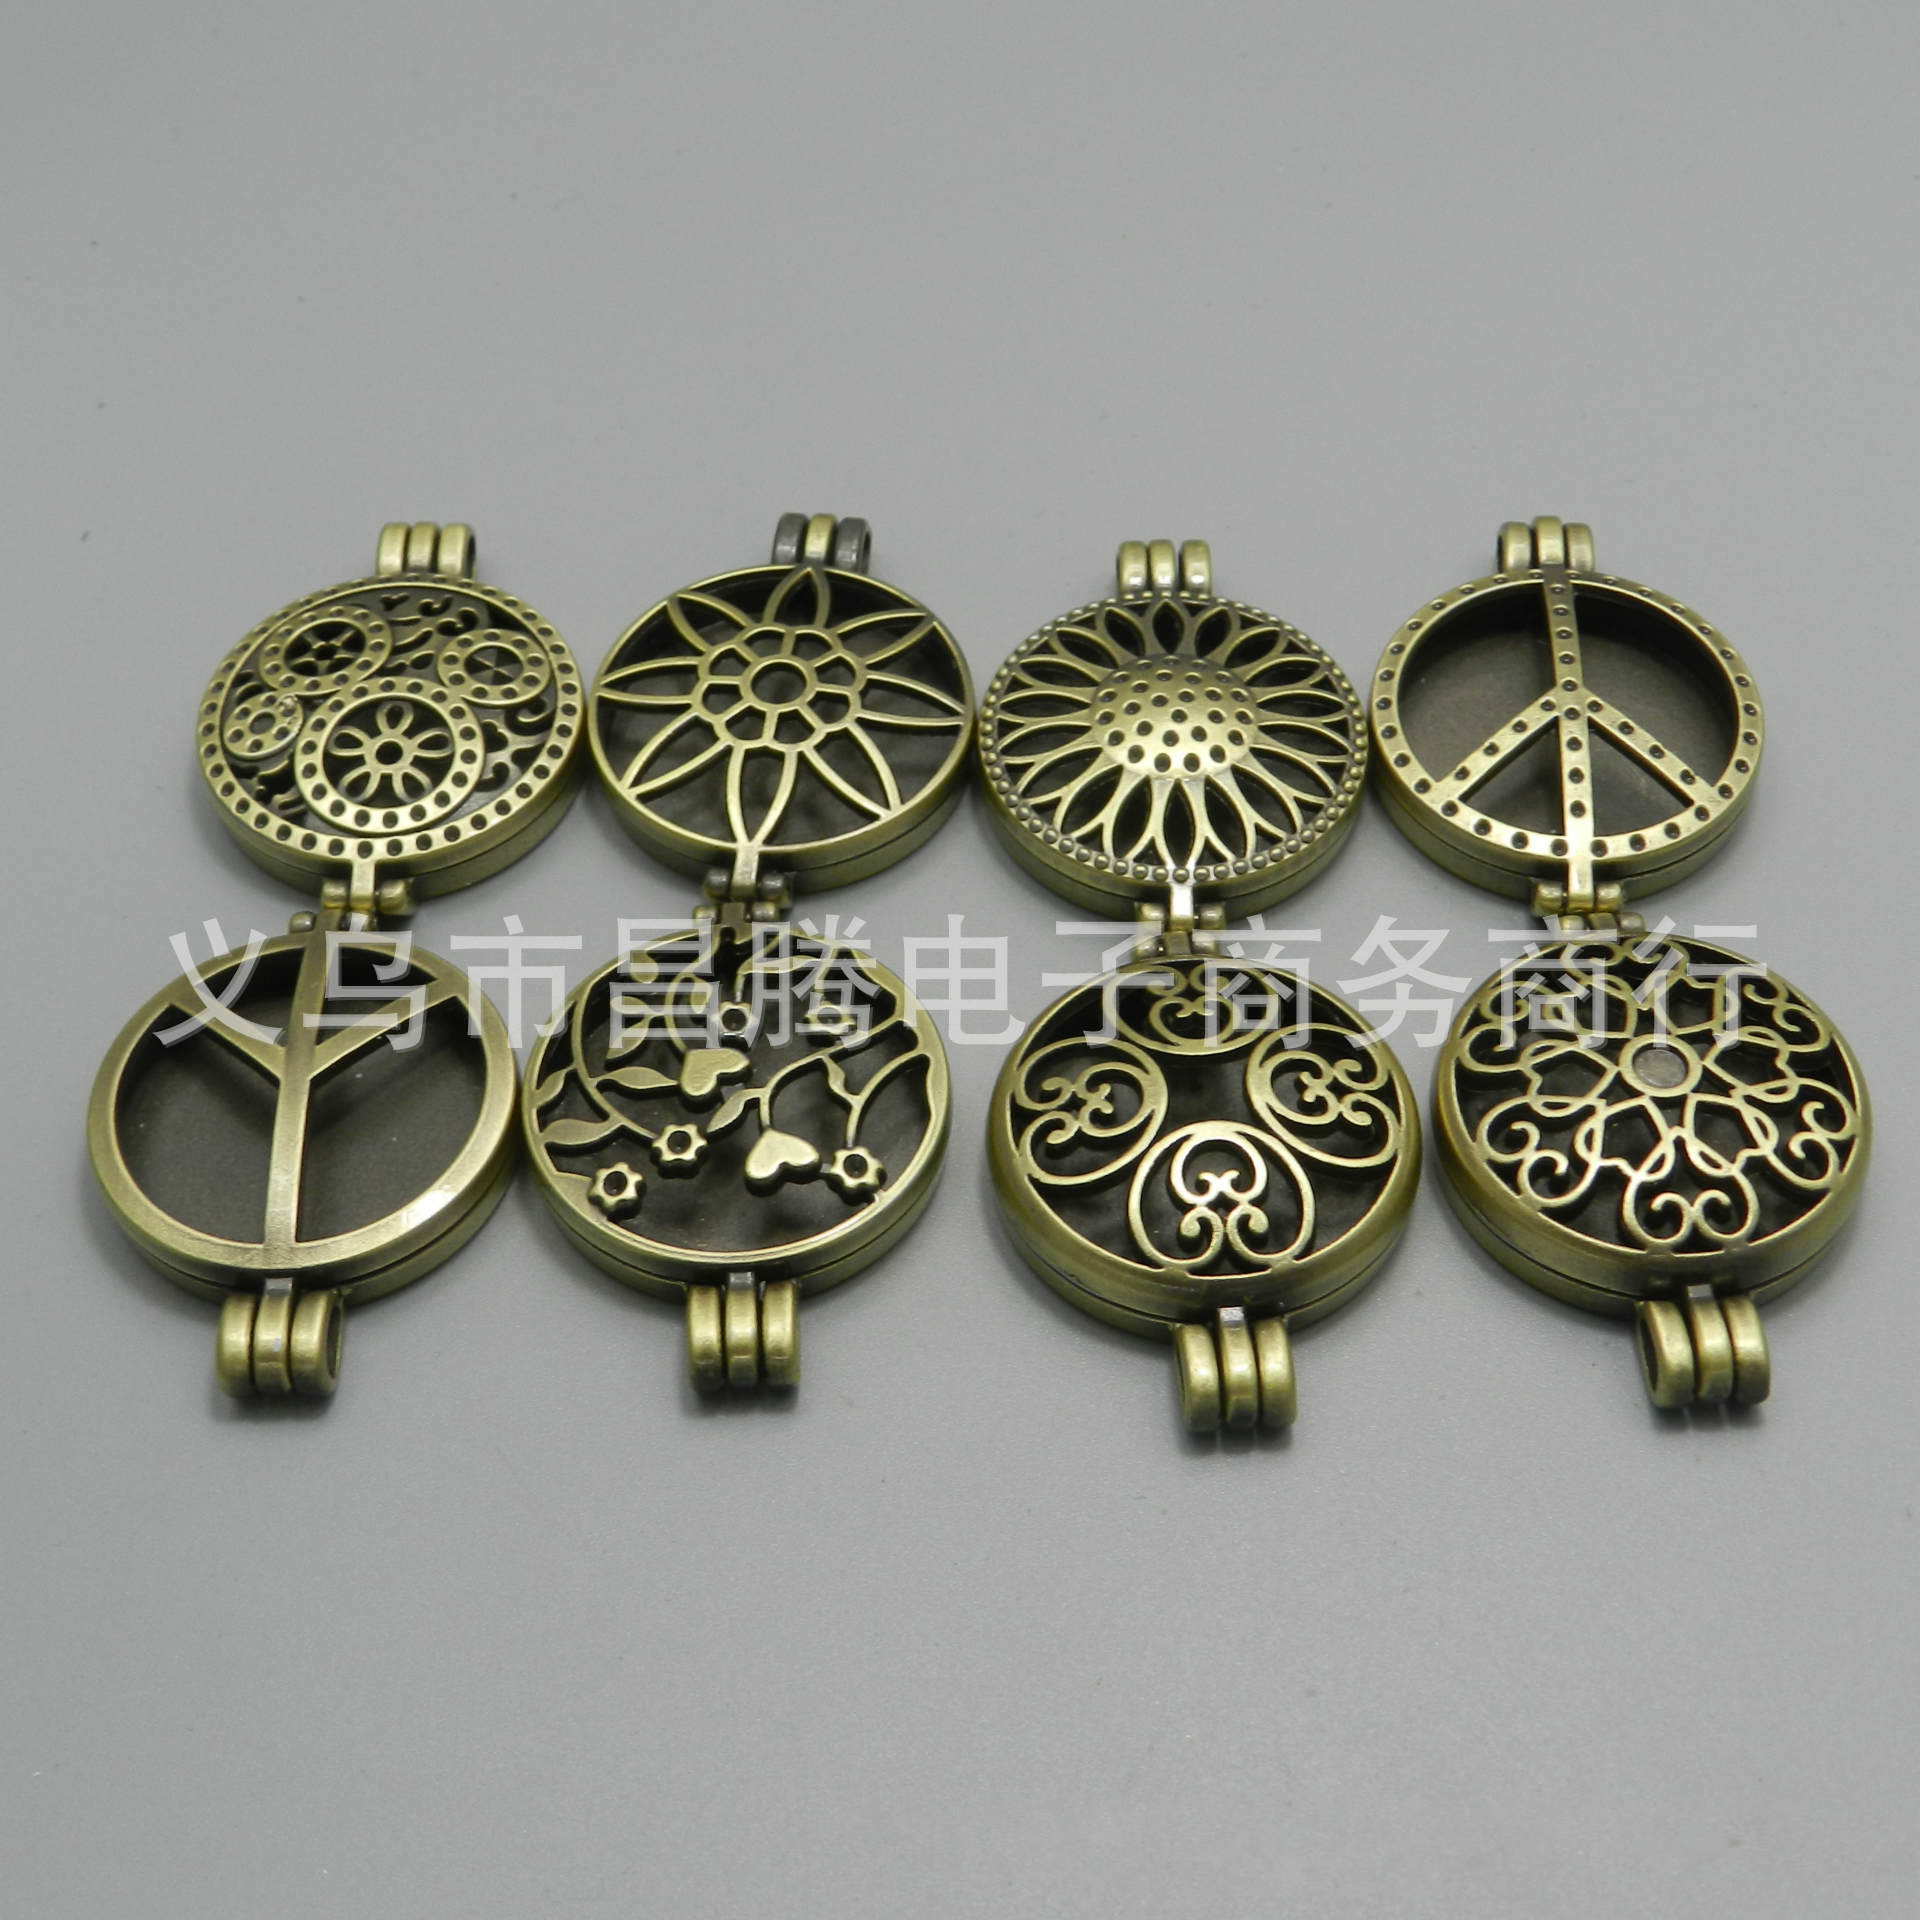 Ancient bronze wire-drawing phase box into 30mm time gem hollowed alloy phase box pendant DIY accessories